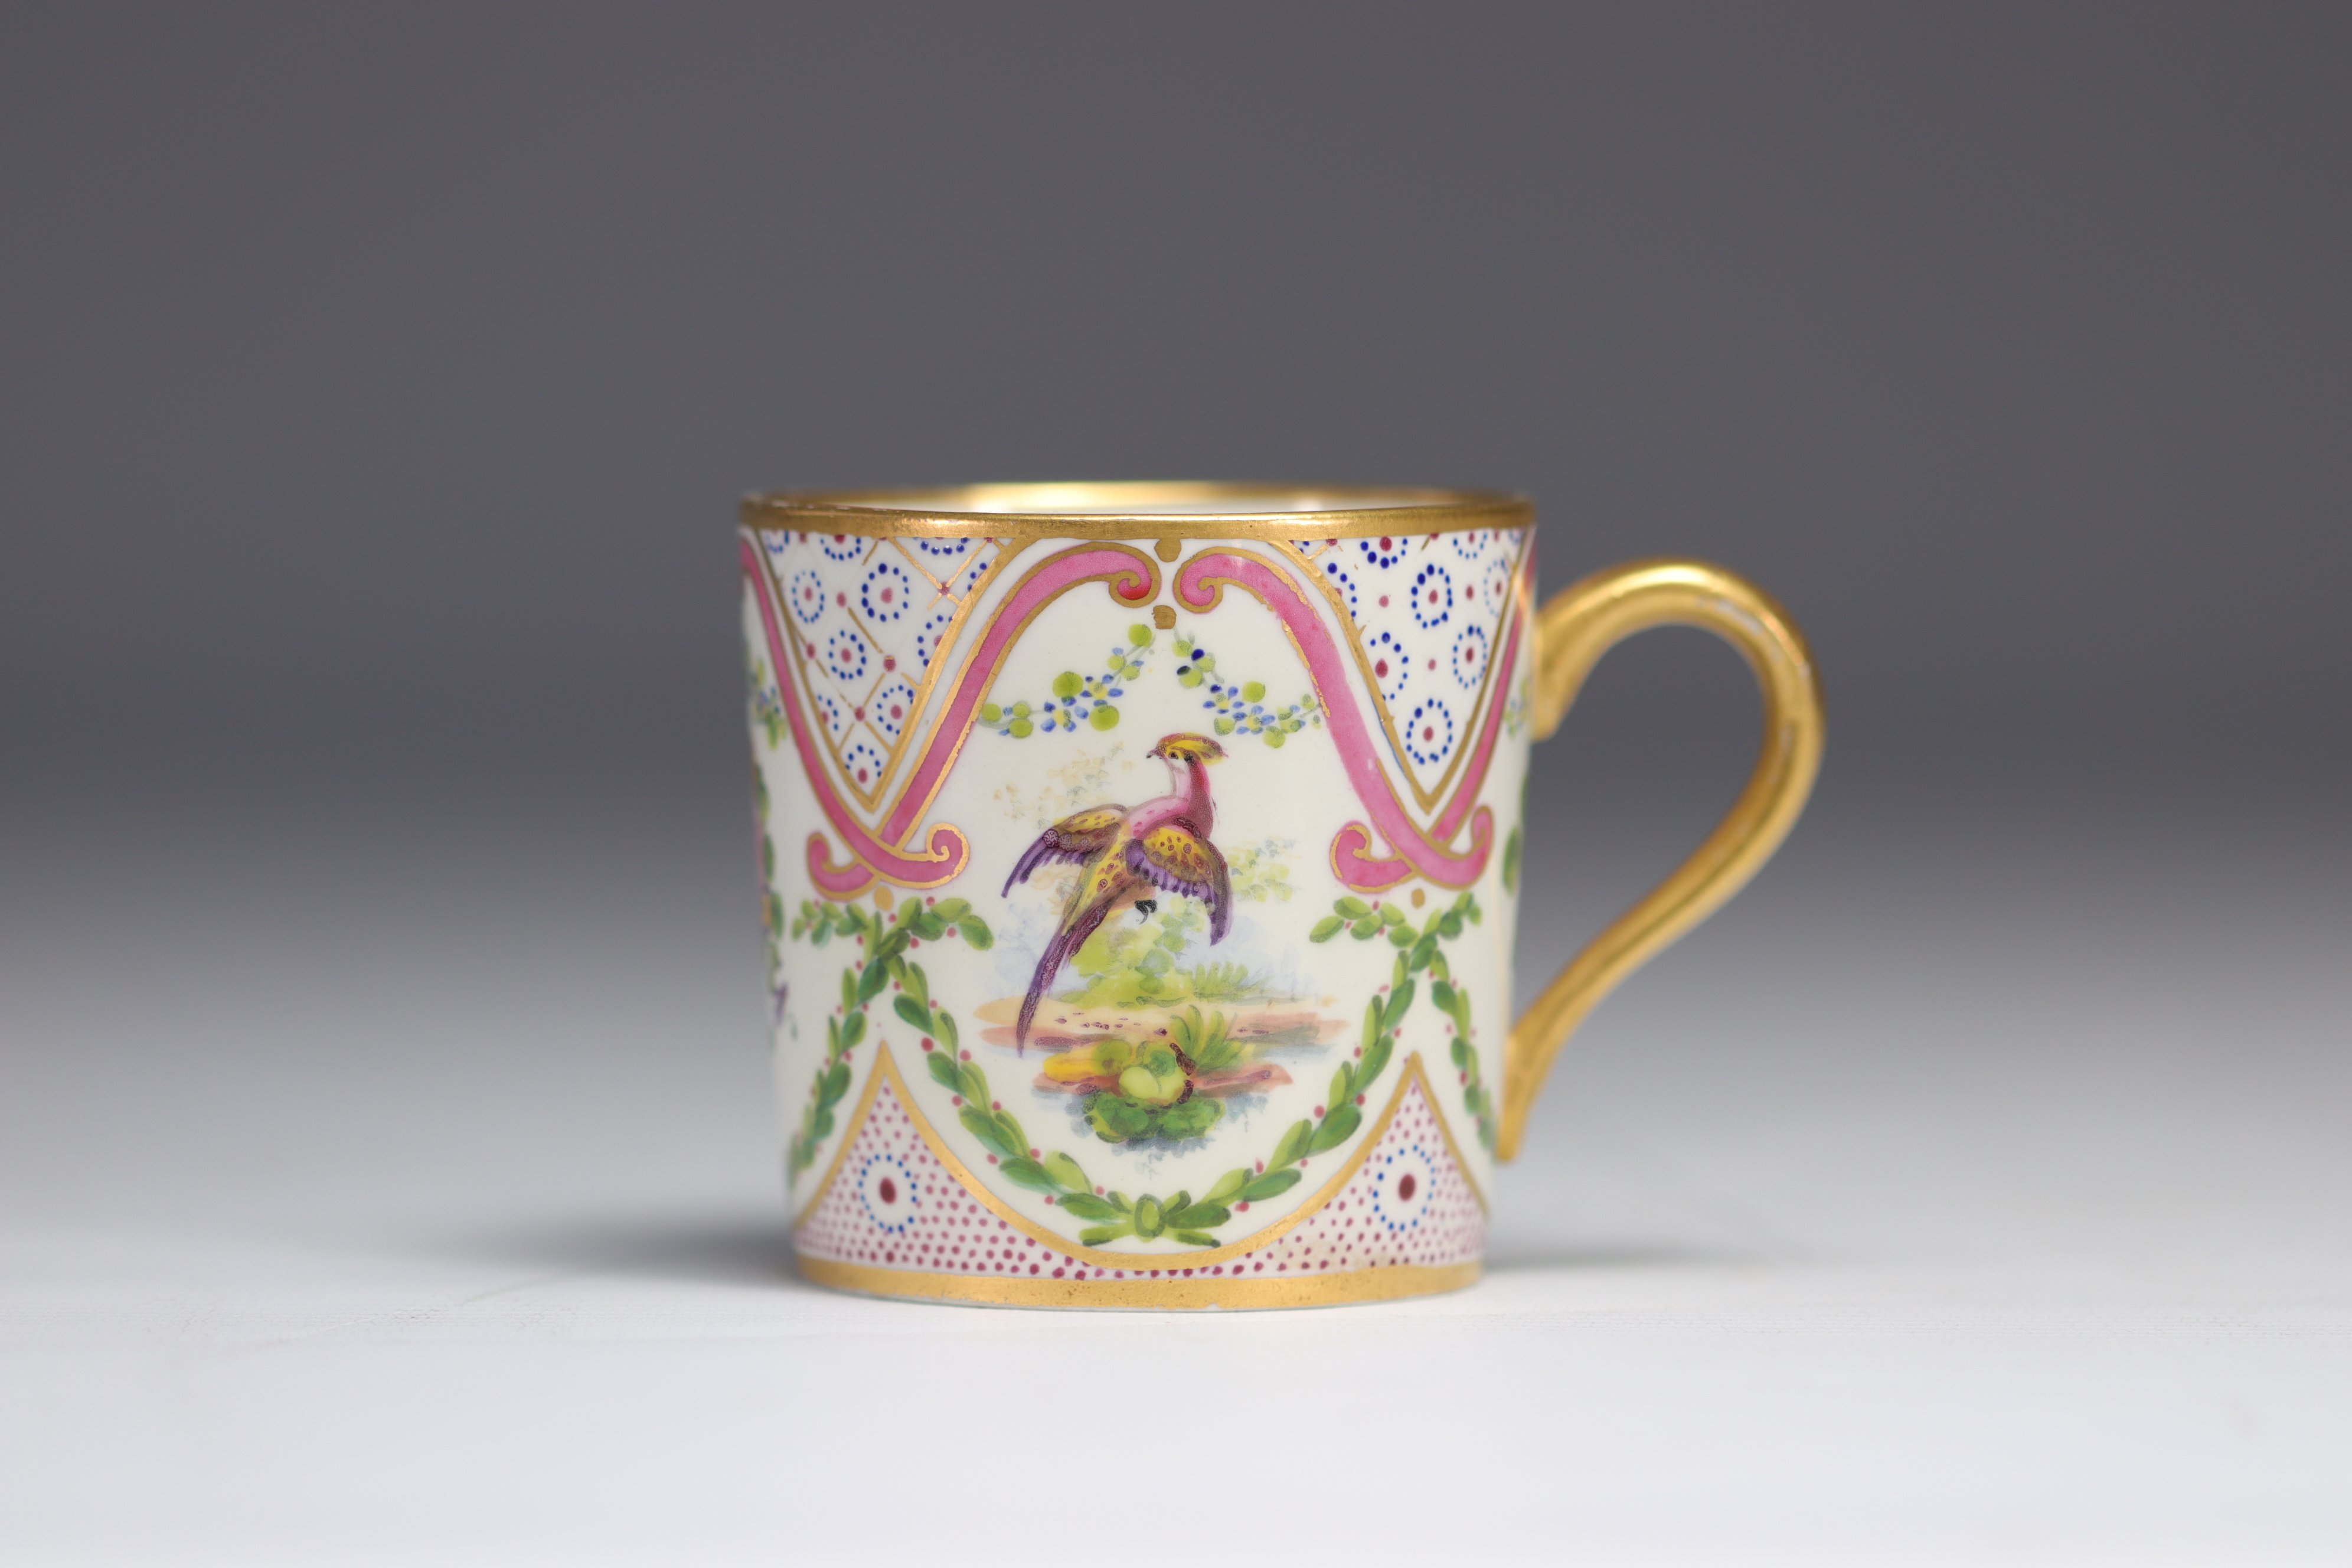 Porcelain "cup and saucer" decorated with birds and flowers from Tournai (Belgium) from 18th century - Image 6 of 7